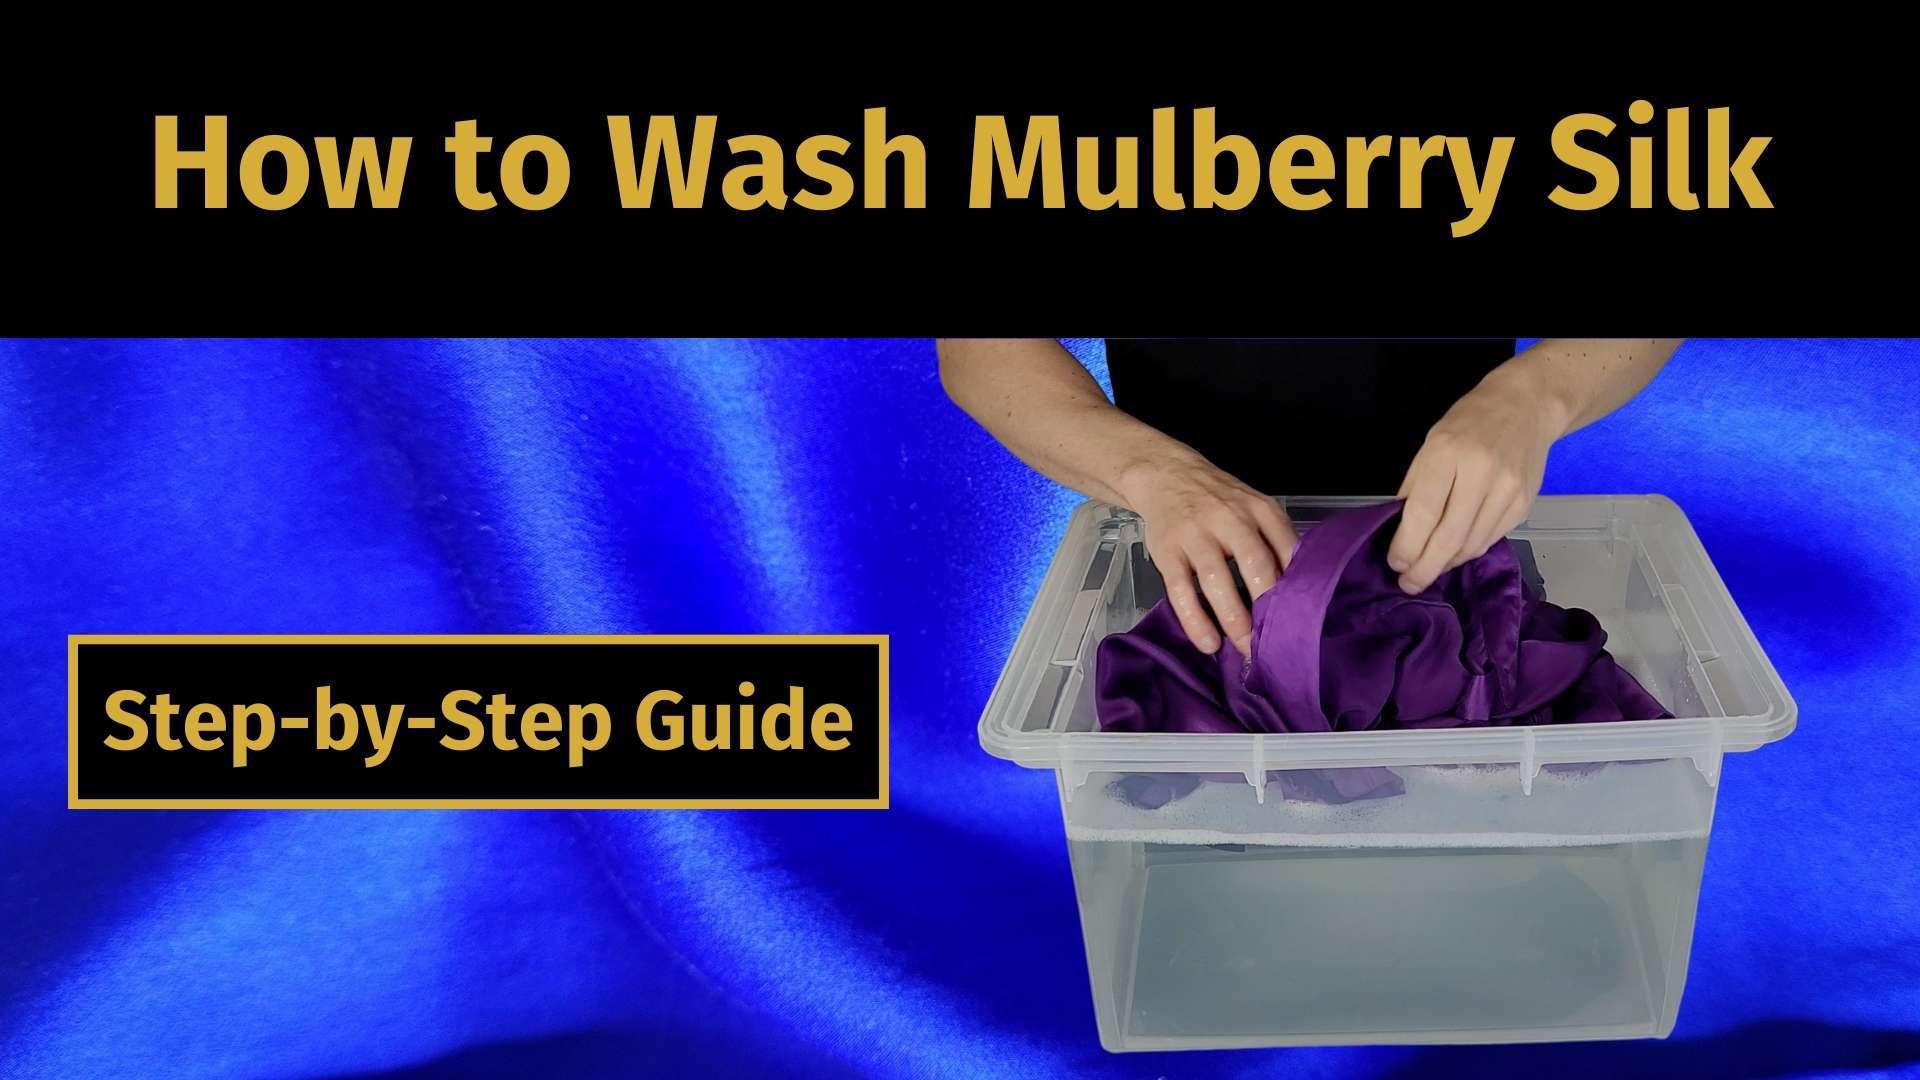 how to wash mulberry silk banner image with a picture of a man washing a mulberry silk shirt in the tub full of soapy water